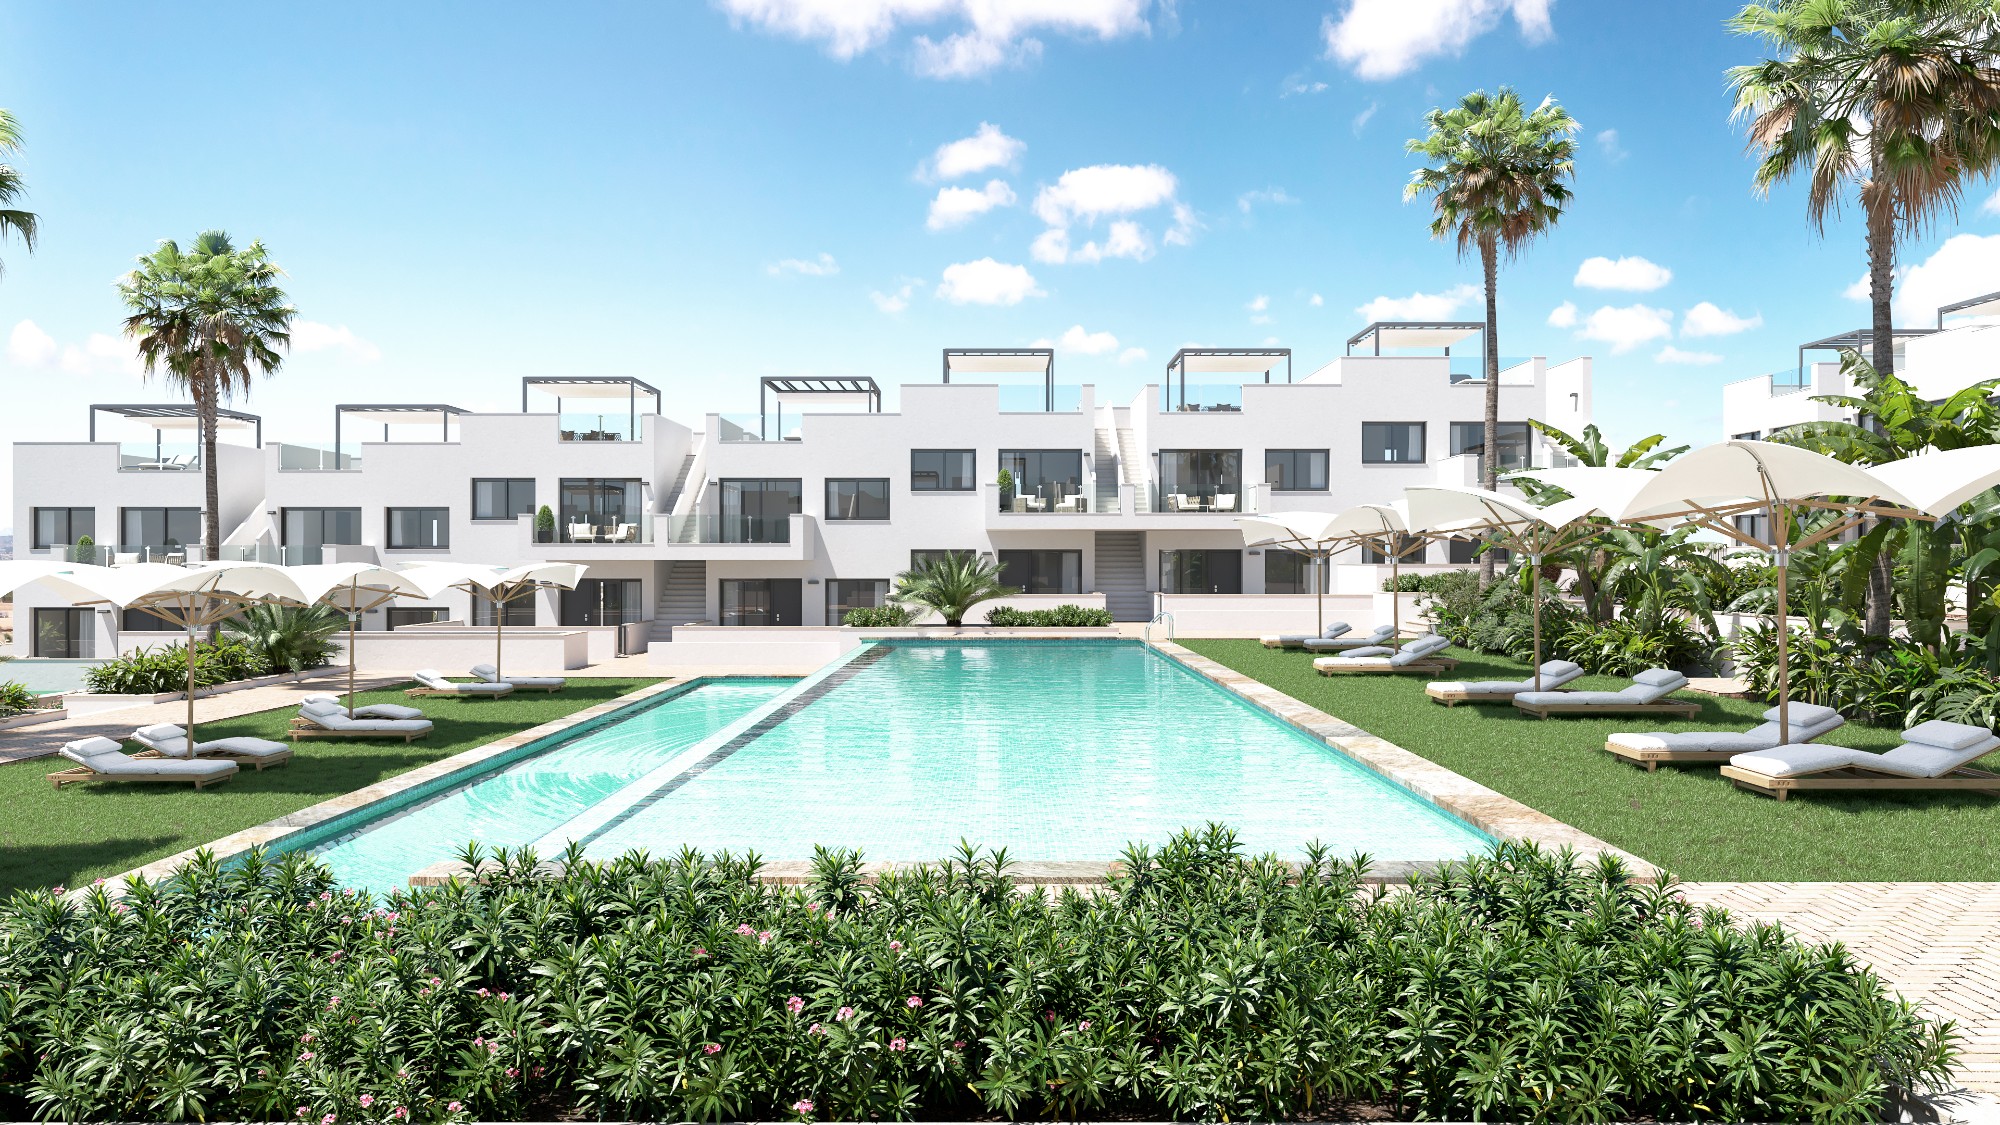 Property Image 571208-torrevieja-townhouses-2-2